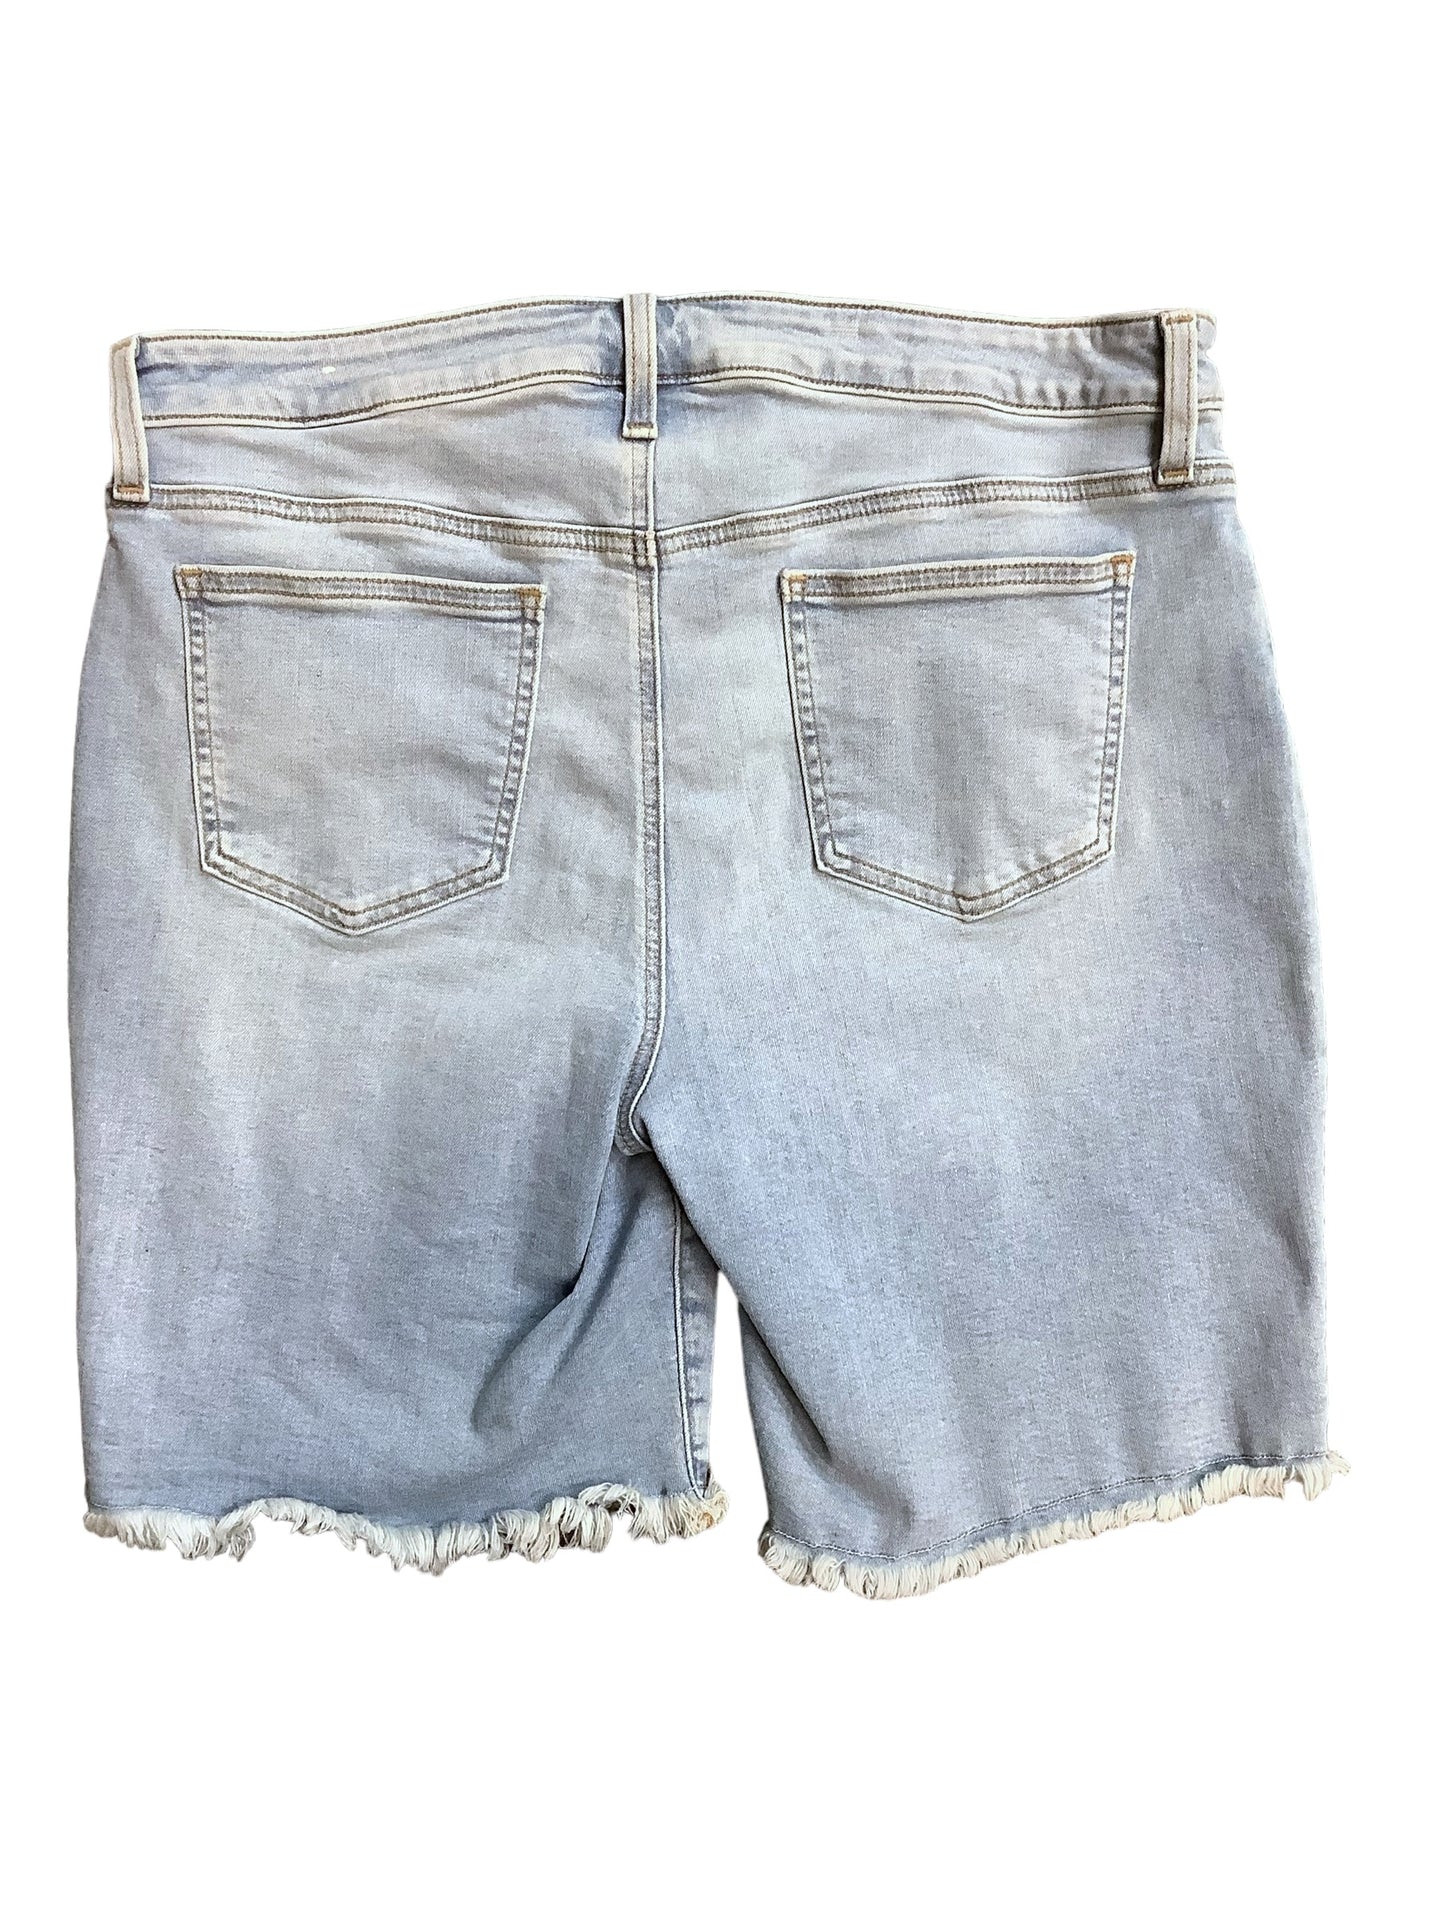 Shorts By Chicos  Size: 12